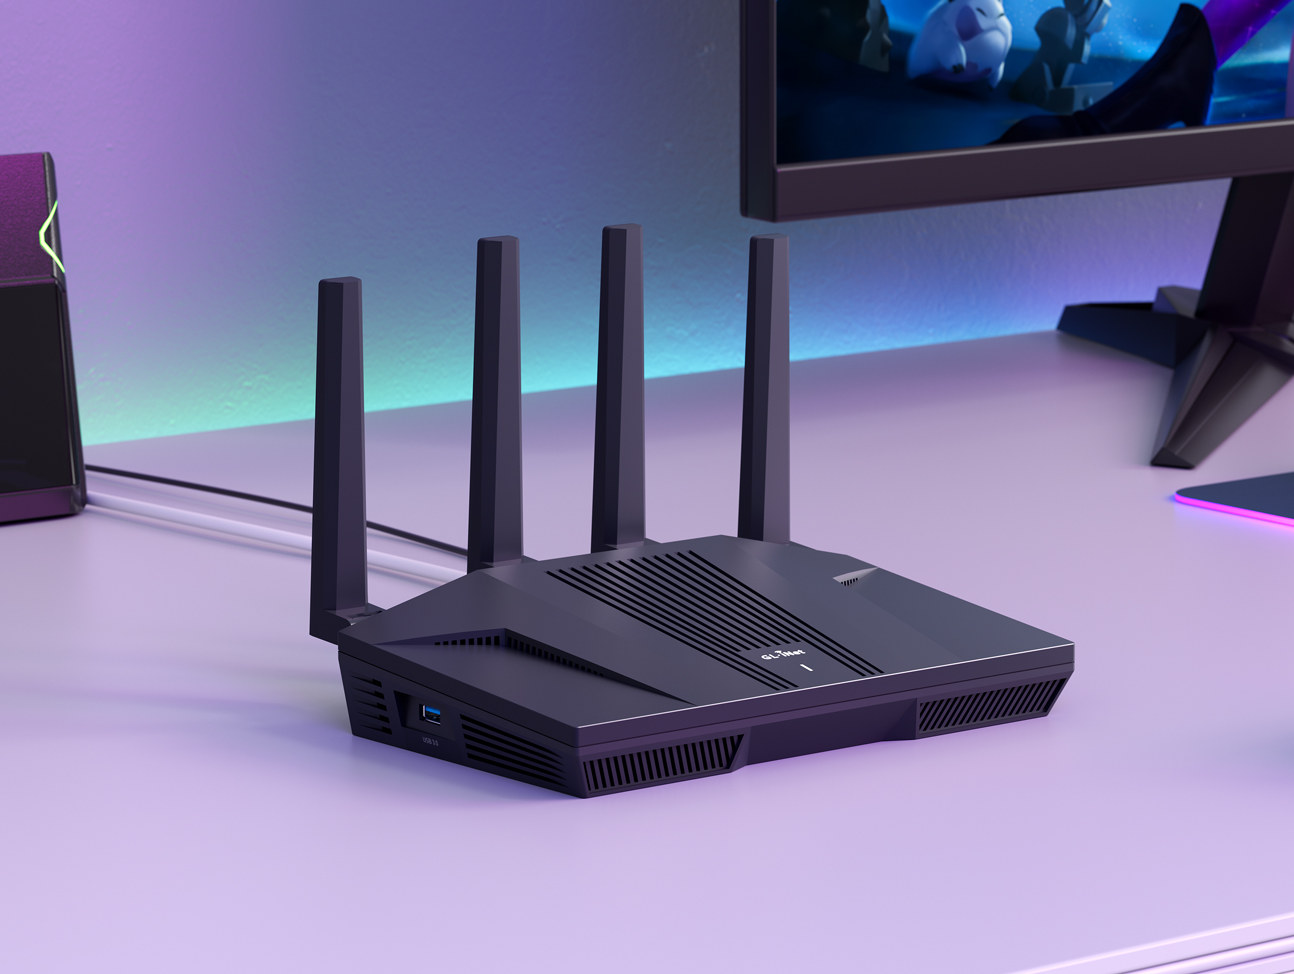 GL.iNet Flint2 AX6000 router supports up to 900 Mbps WireGuard VPN